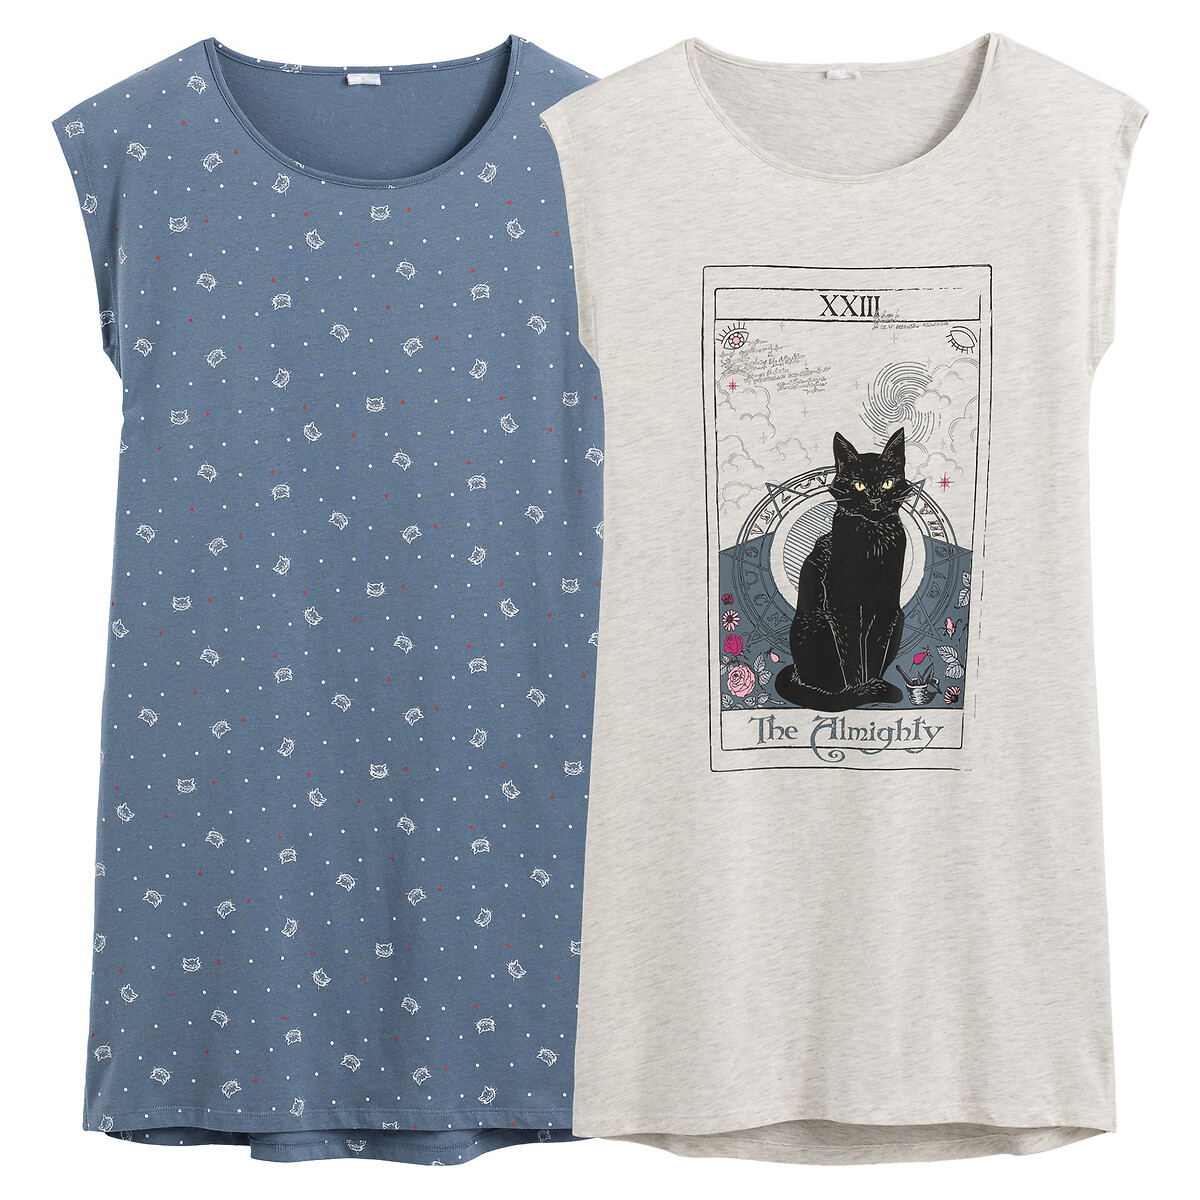 Pack of 2 Nightshirts in Printed Cotton with Short Sleeves